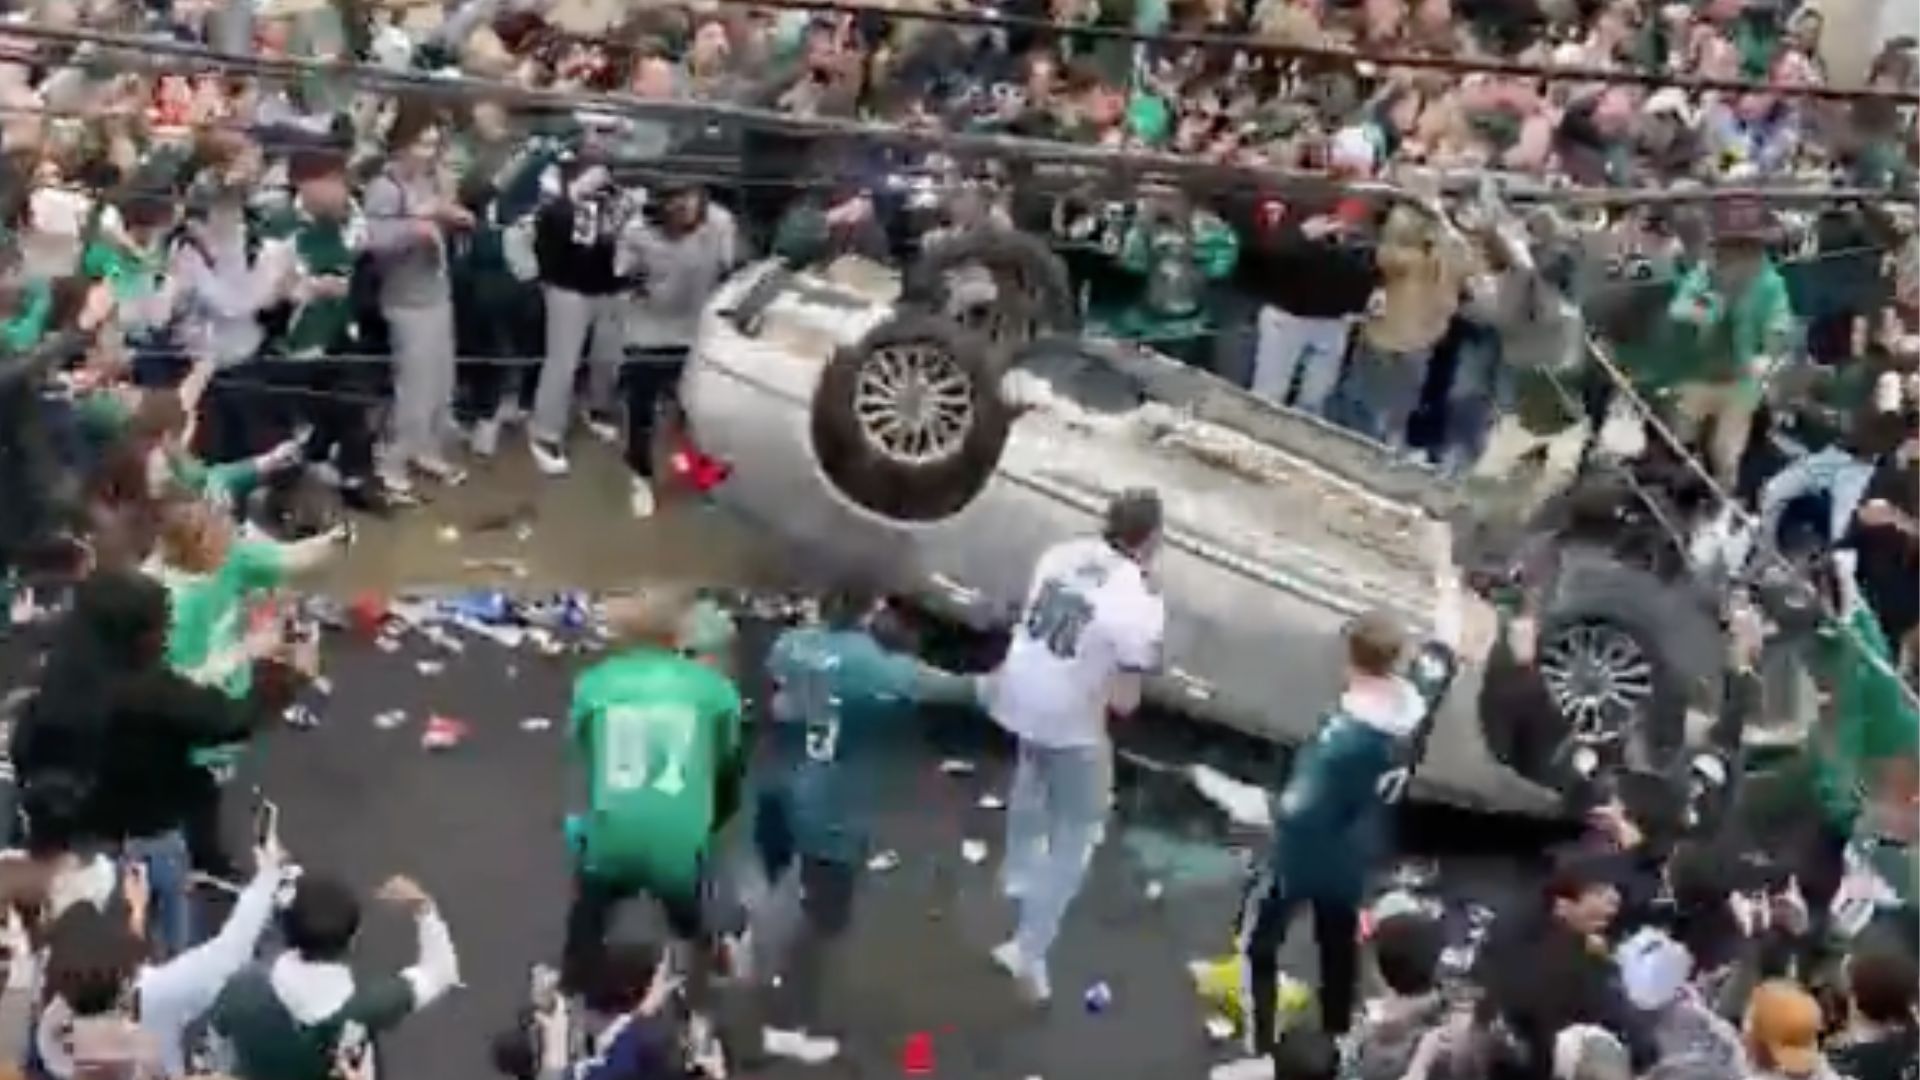 WATCH: Eagles Fans Pregame Super Bowl LVII By Flipping Parked Car